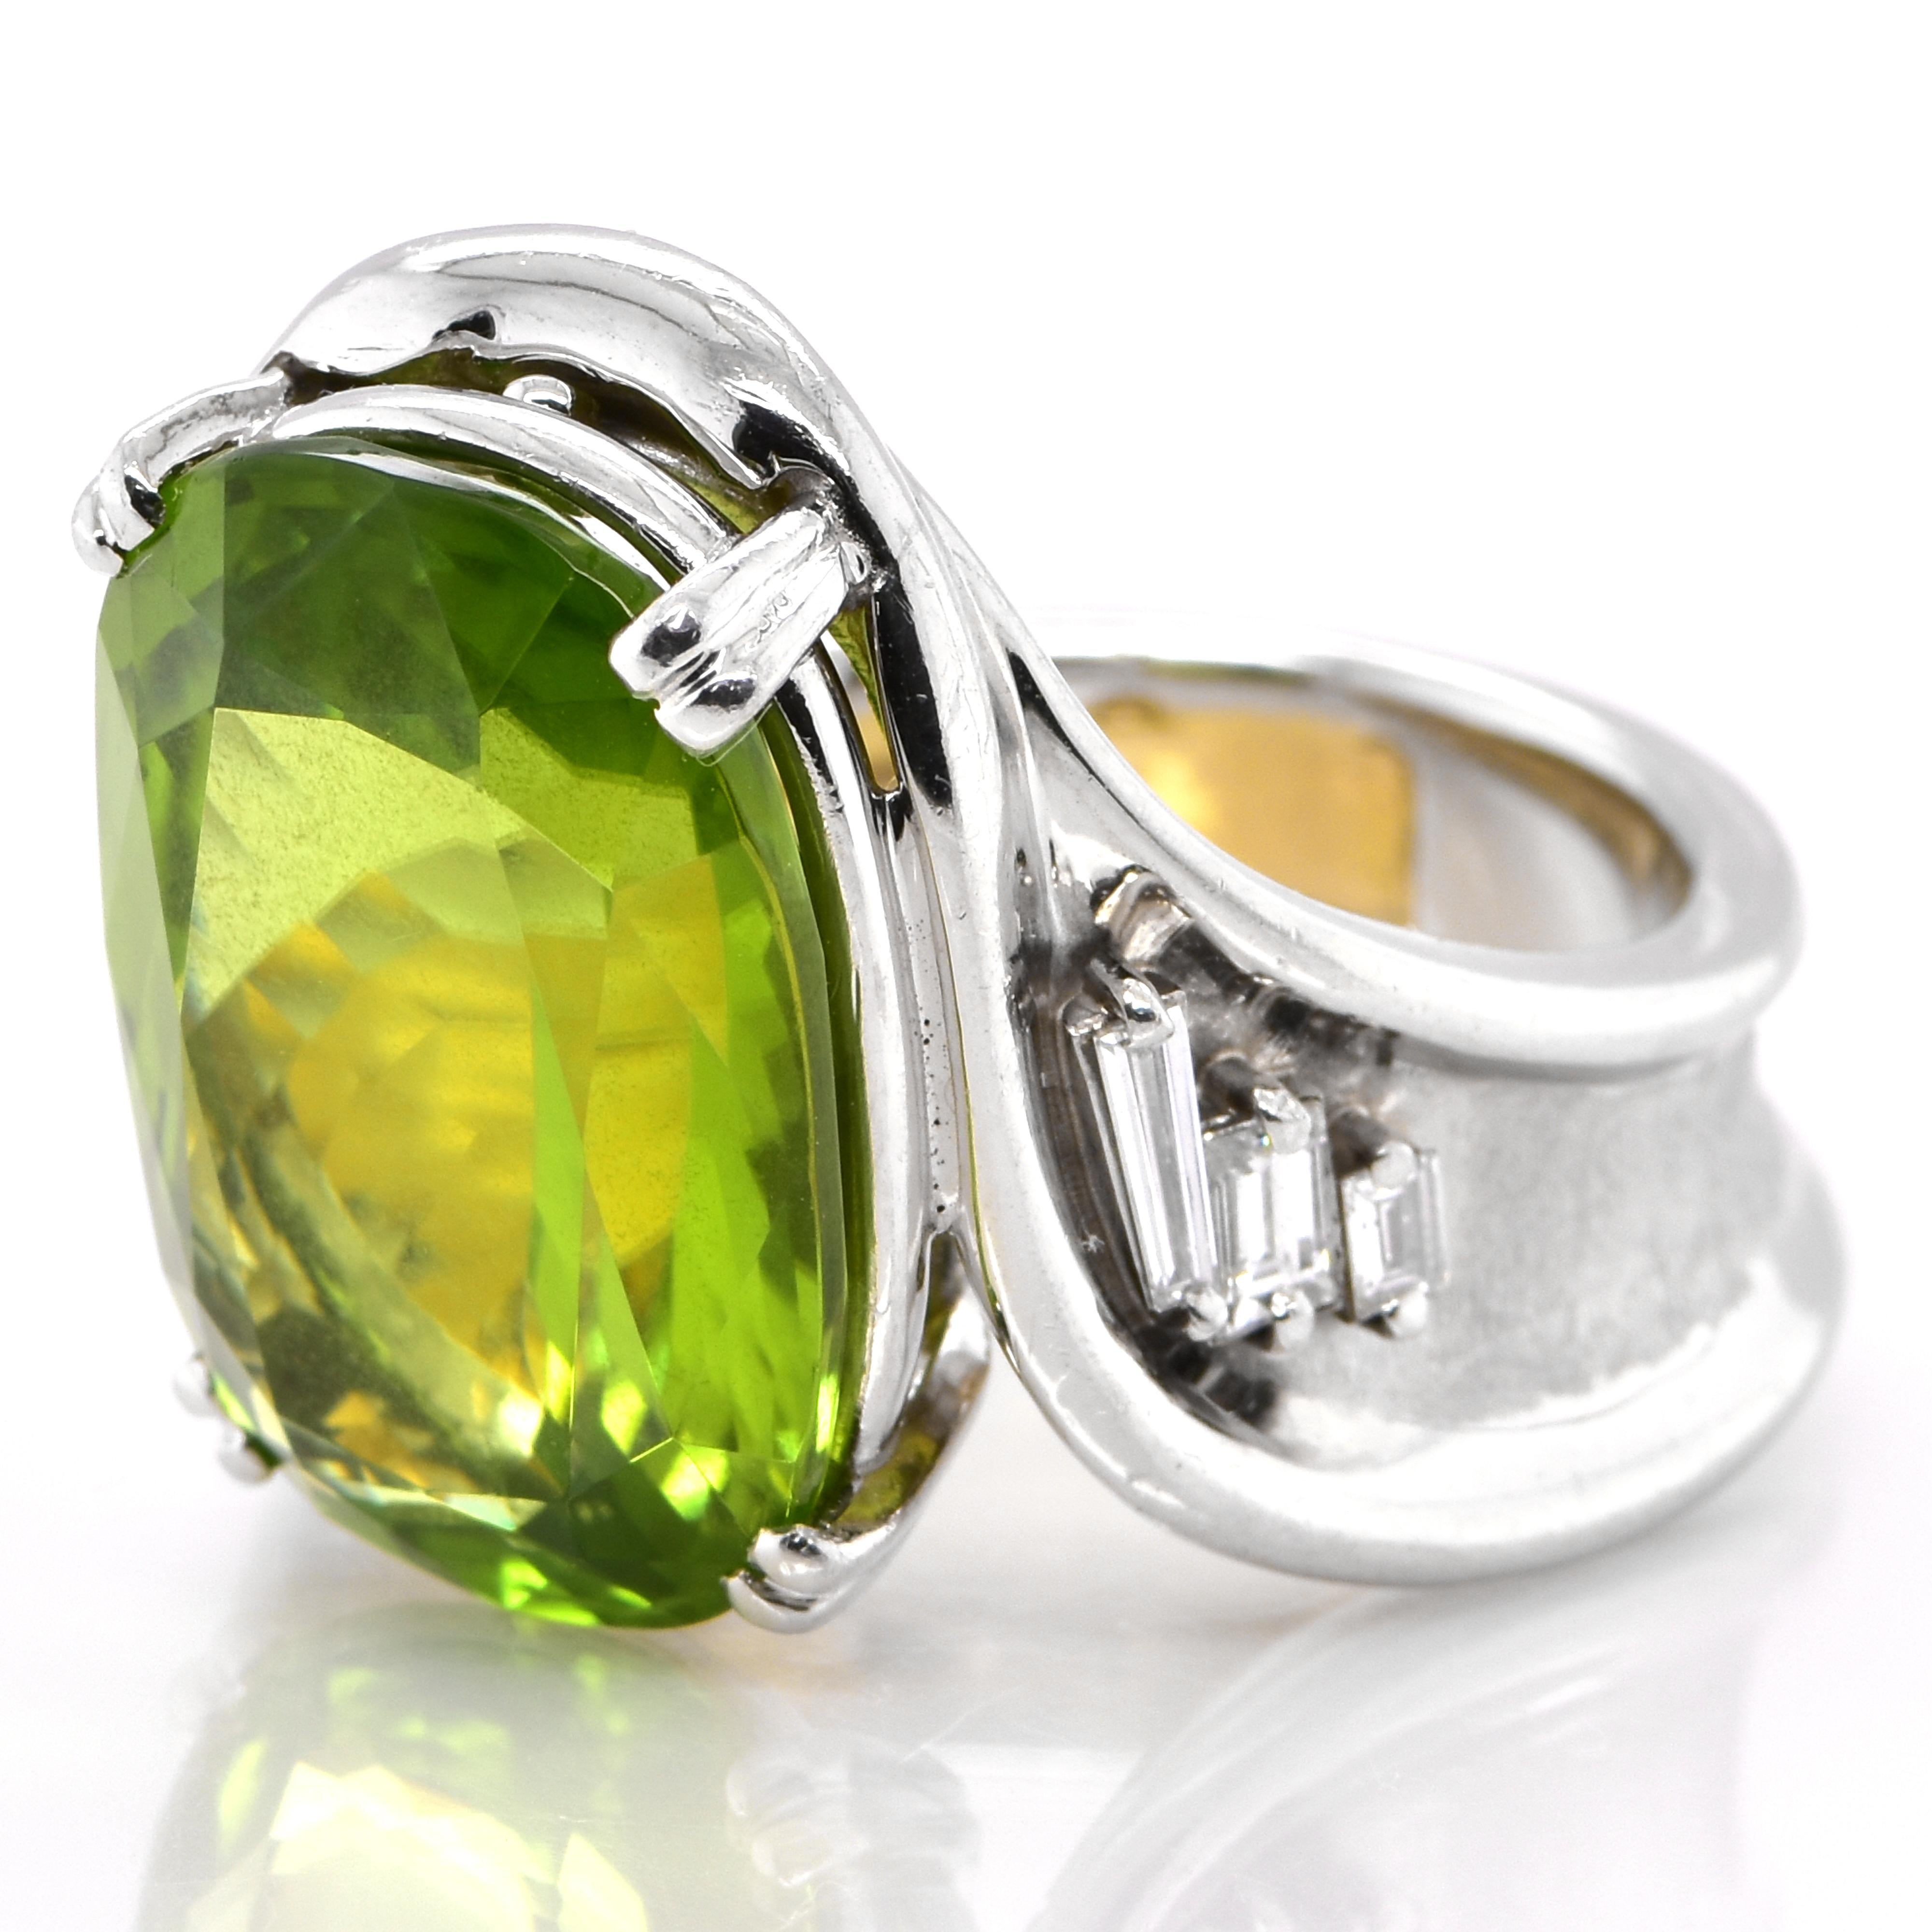 A beautiful Cocktail ring featuring a 15.32 Carat Natural Peridot and 0.26 Carats Diamond Accents set in 18 Karat Yellow Gold and Platinum. Peridot is the birthstone of the month of August. Peridot is one of the few gemstones that occur in only one